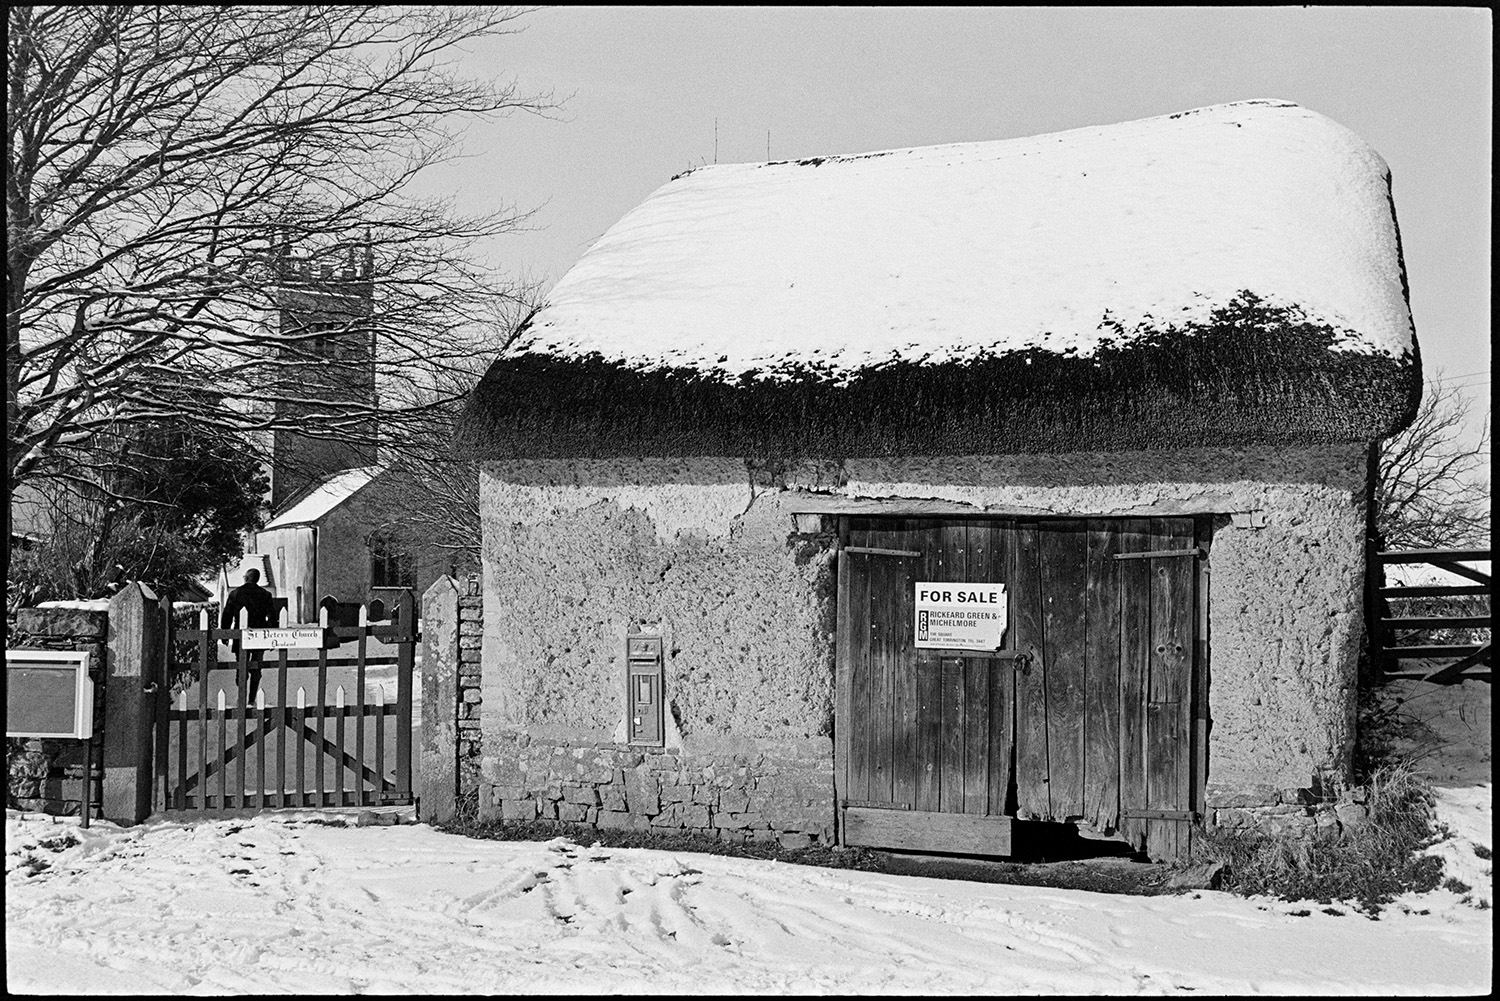 Small cob and thatch stable barn under snow (for sale) now modernised. 
[A cob and thatch barn with a post box in its wall by the church at Dowland. It is covered in snows and has a for sale sign fixed to the wooden door.]